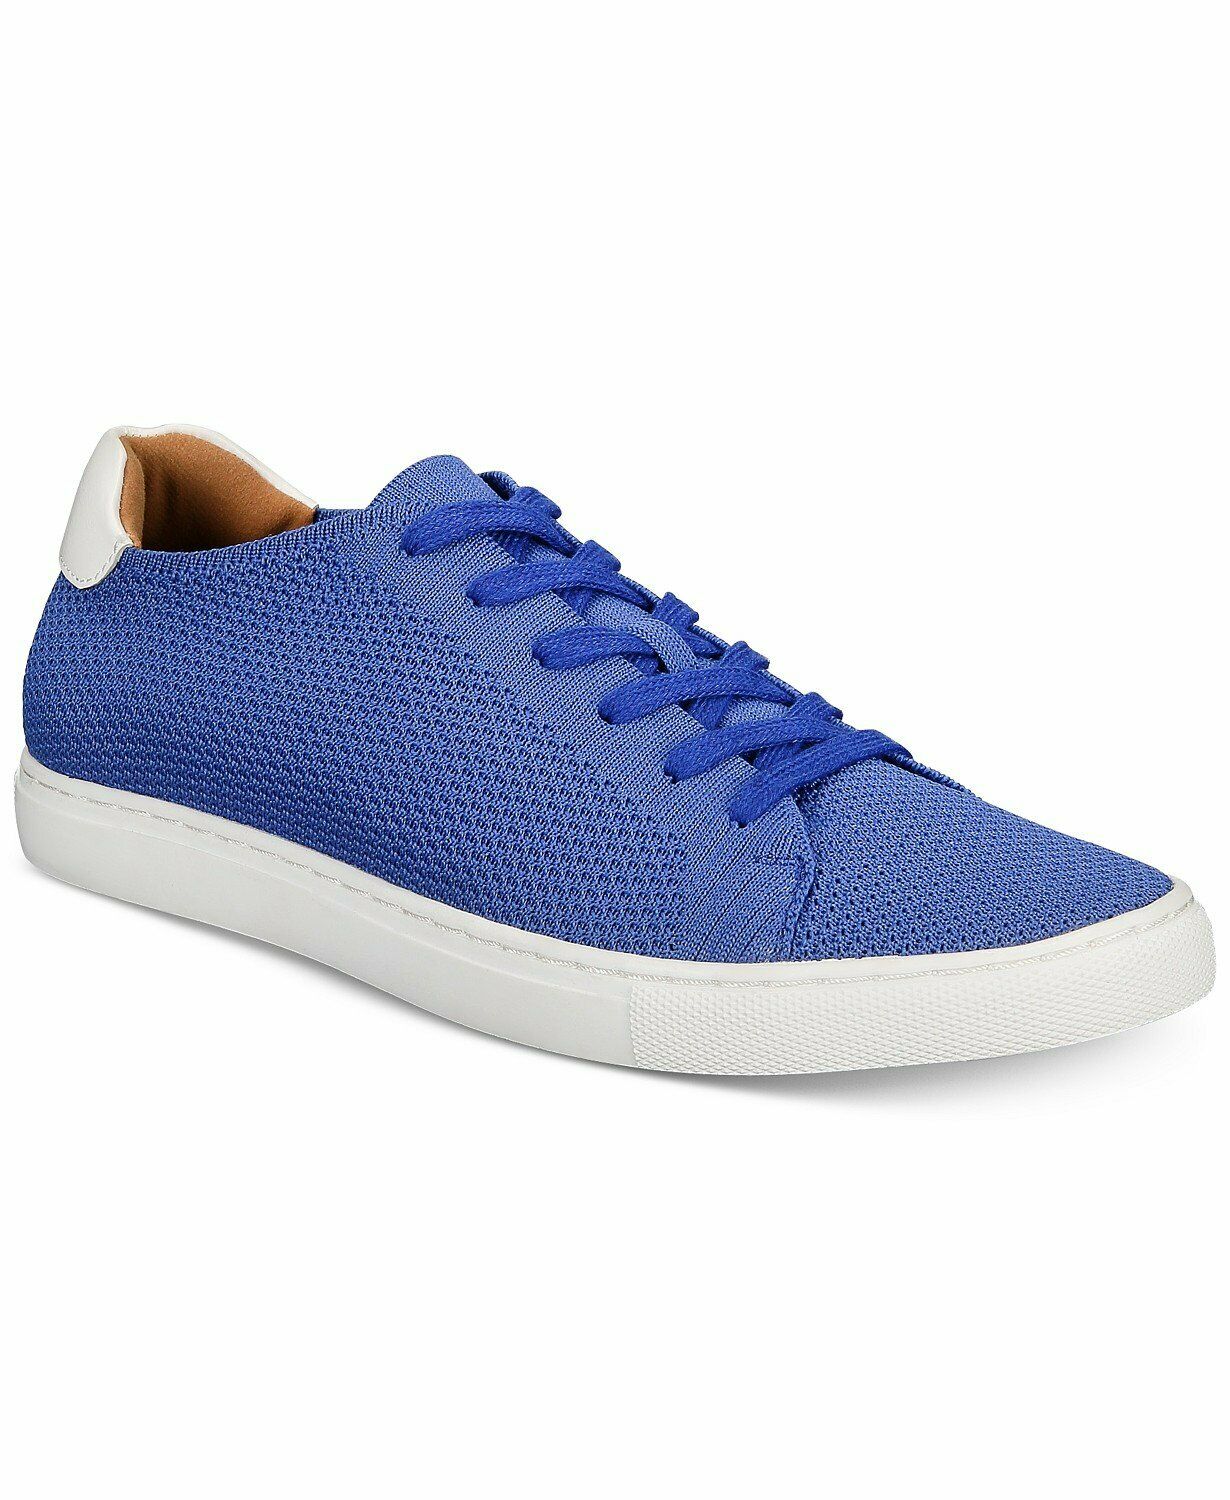 Bar III Men's Donnie Knit Lace-Up Sneakers Blue Size 11M